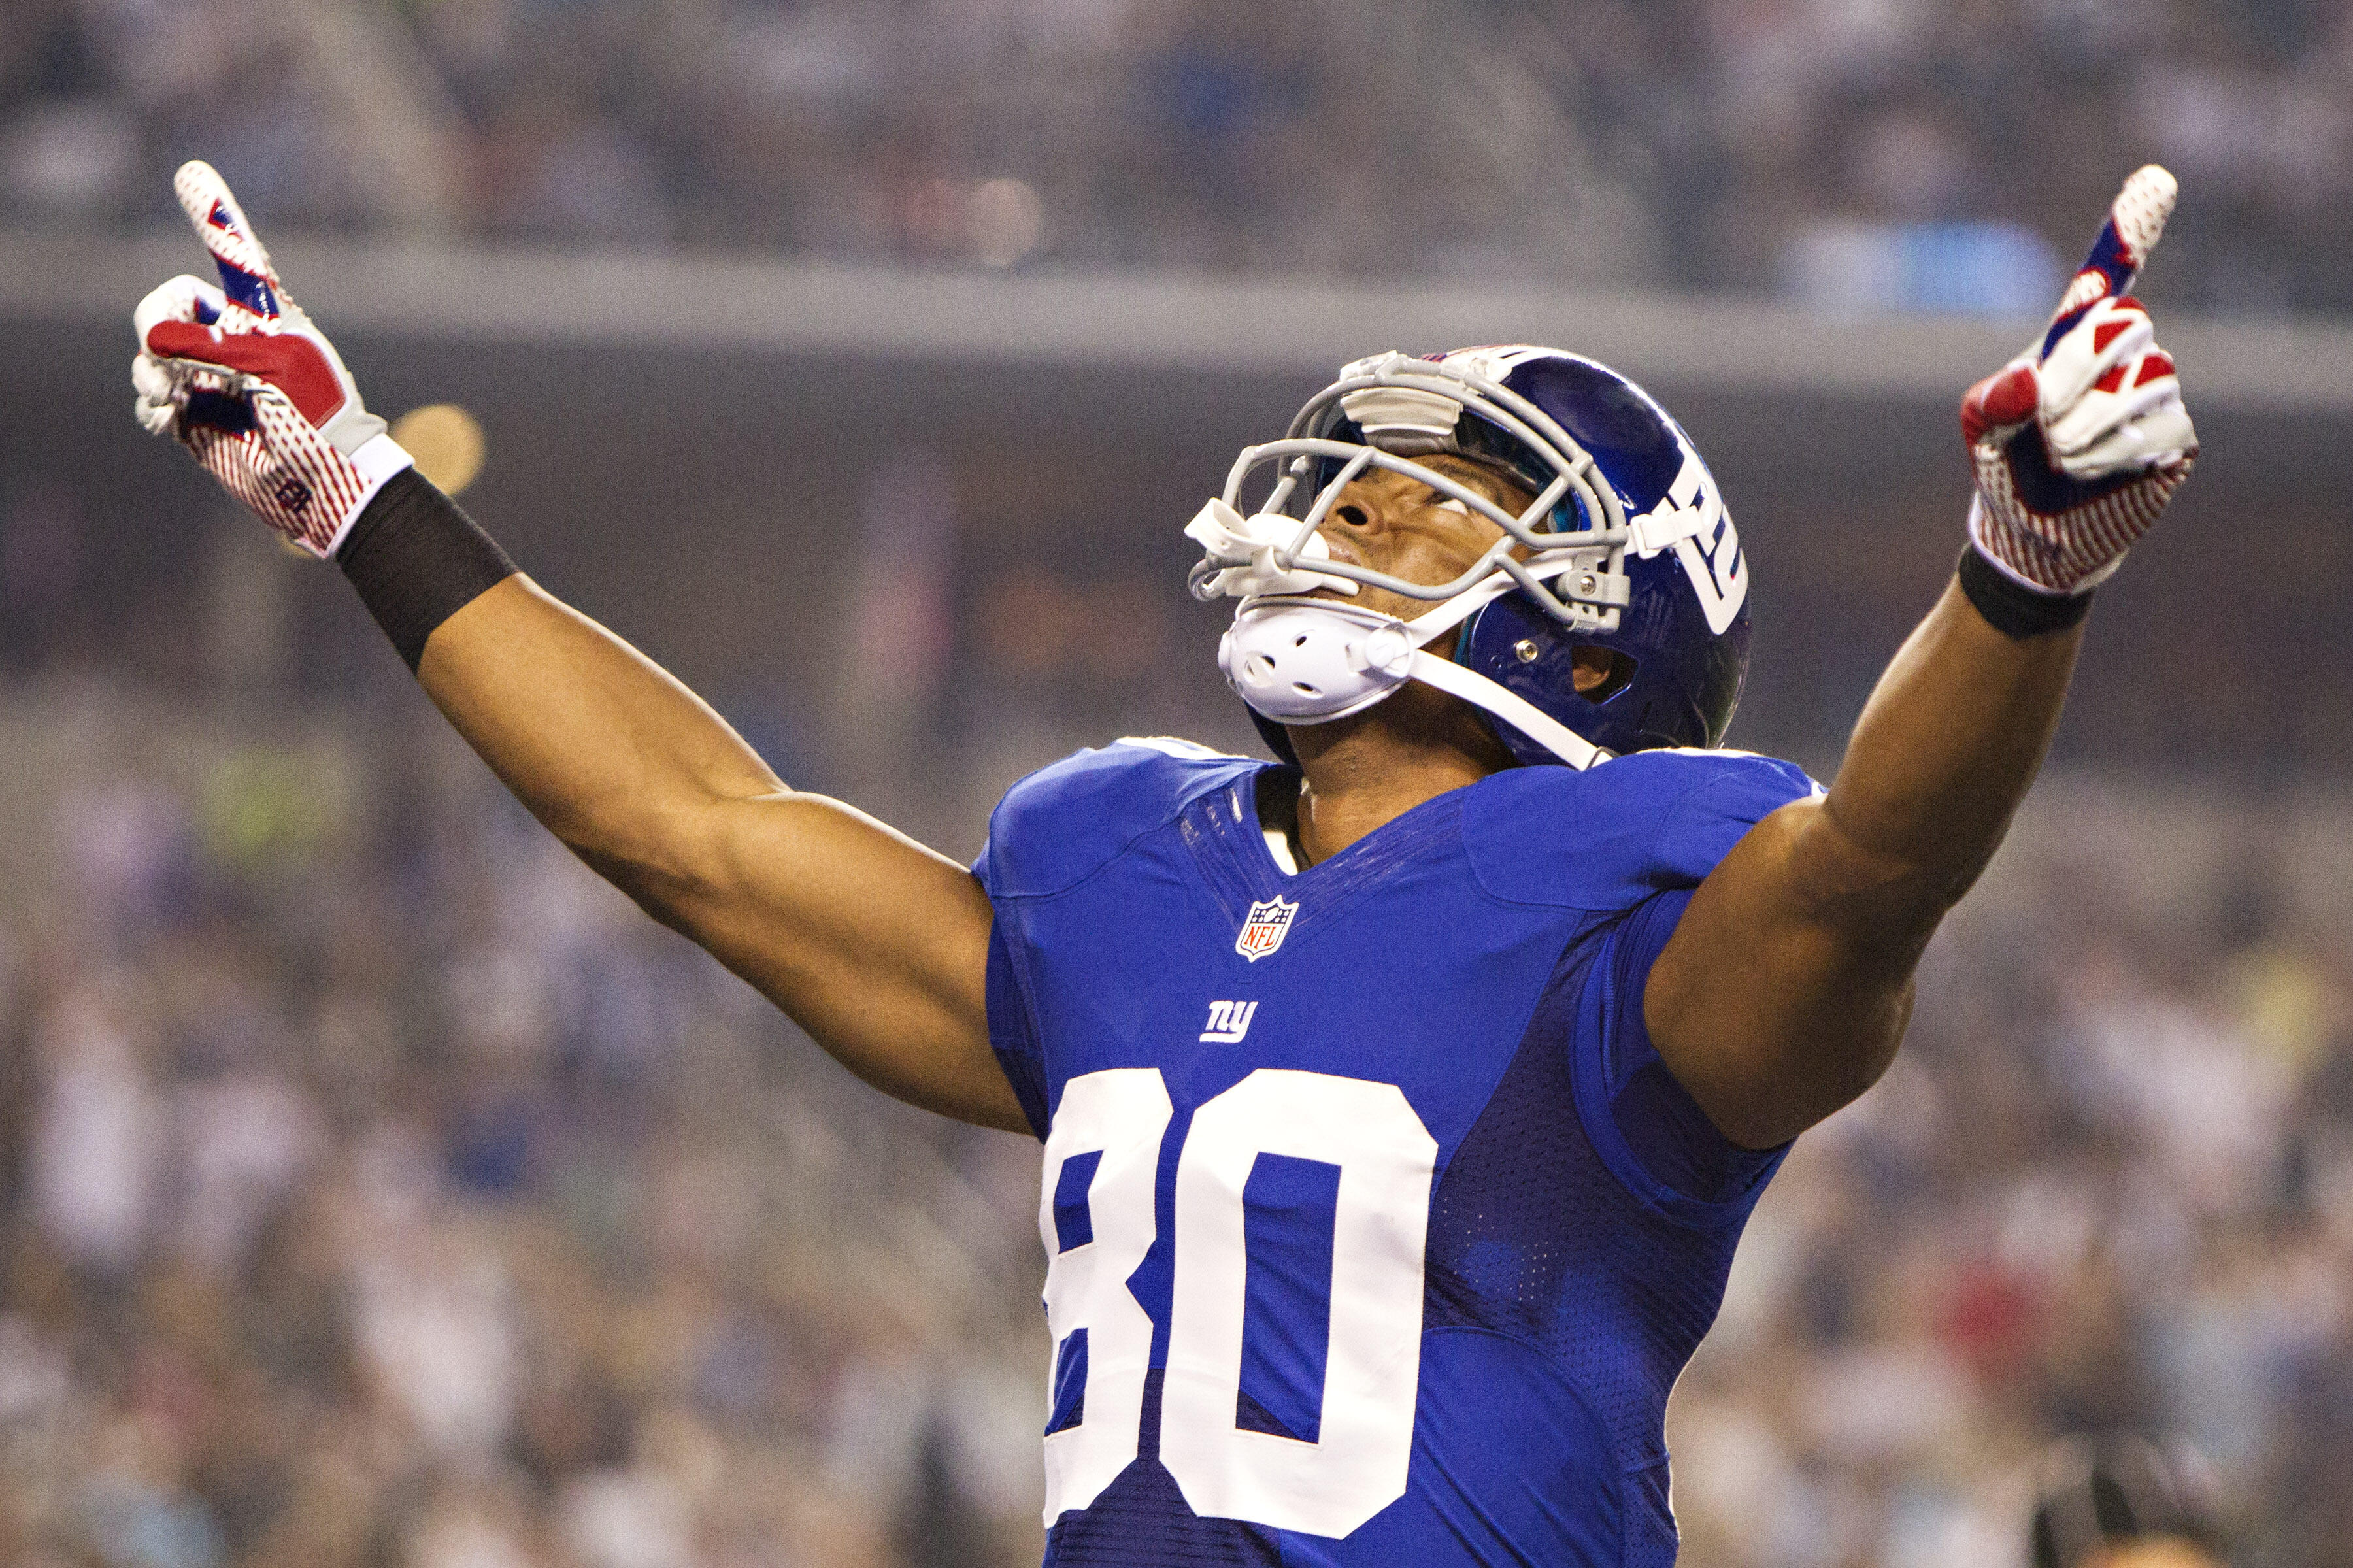 ARLINGTON, TX - SEPTEMBER 8:  Victor Cruz #80 of the New York Giants celebrates after scoring a touchdown against the Dallas Cowboys at AT&T Stadium on September 8, 2013 in Arlington, Texas.  The Cowboys defeated the Giants 31-36.  (Photo by Wesley Hitt/G